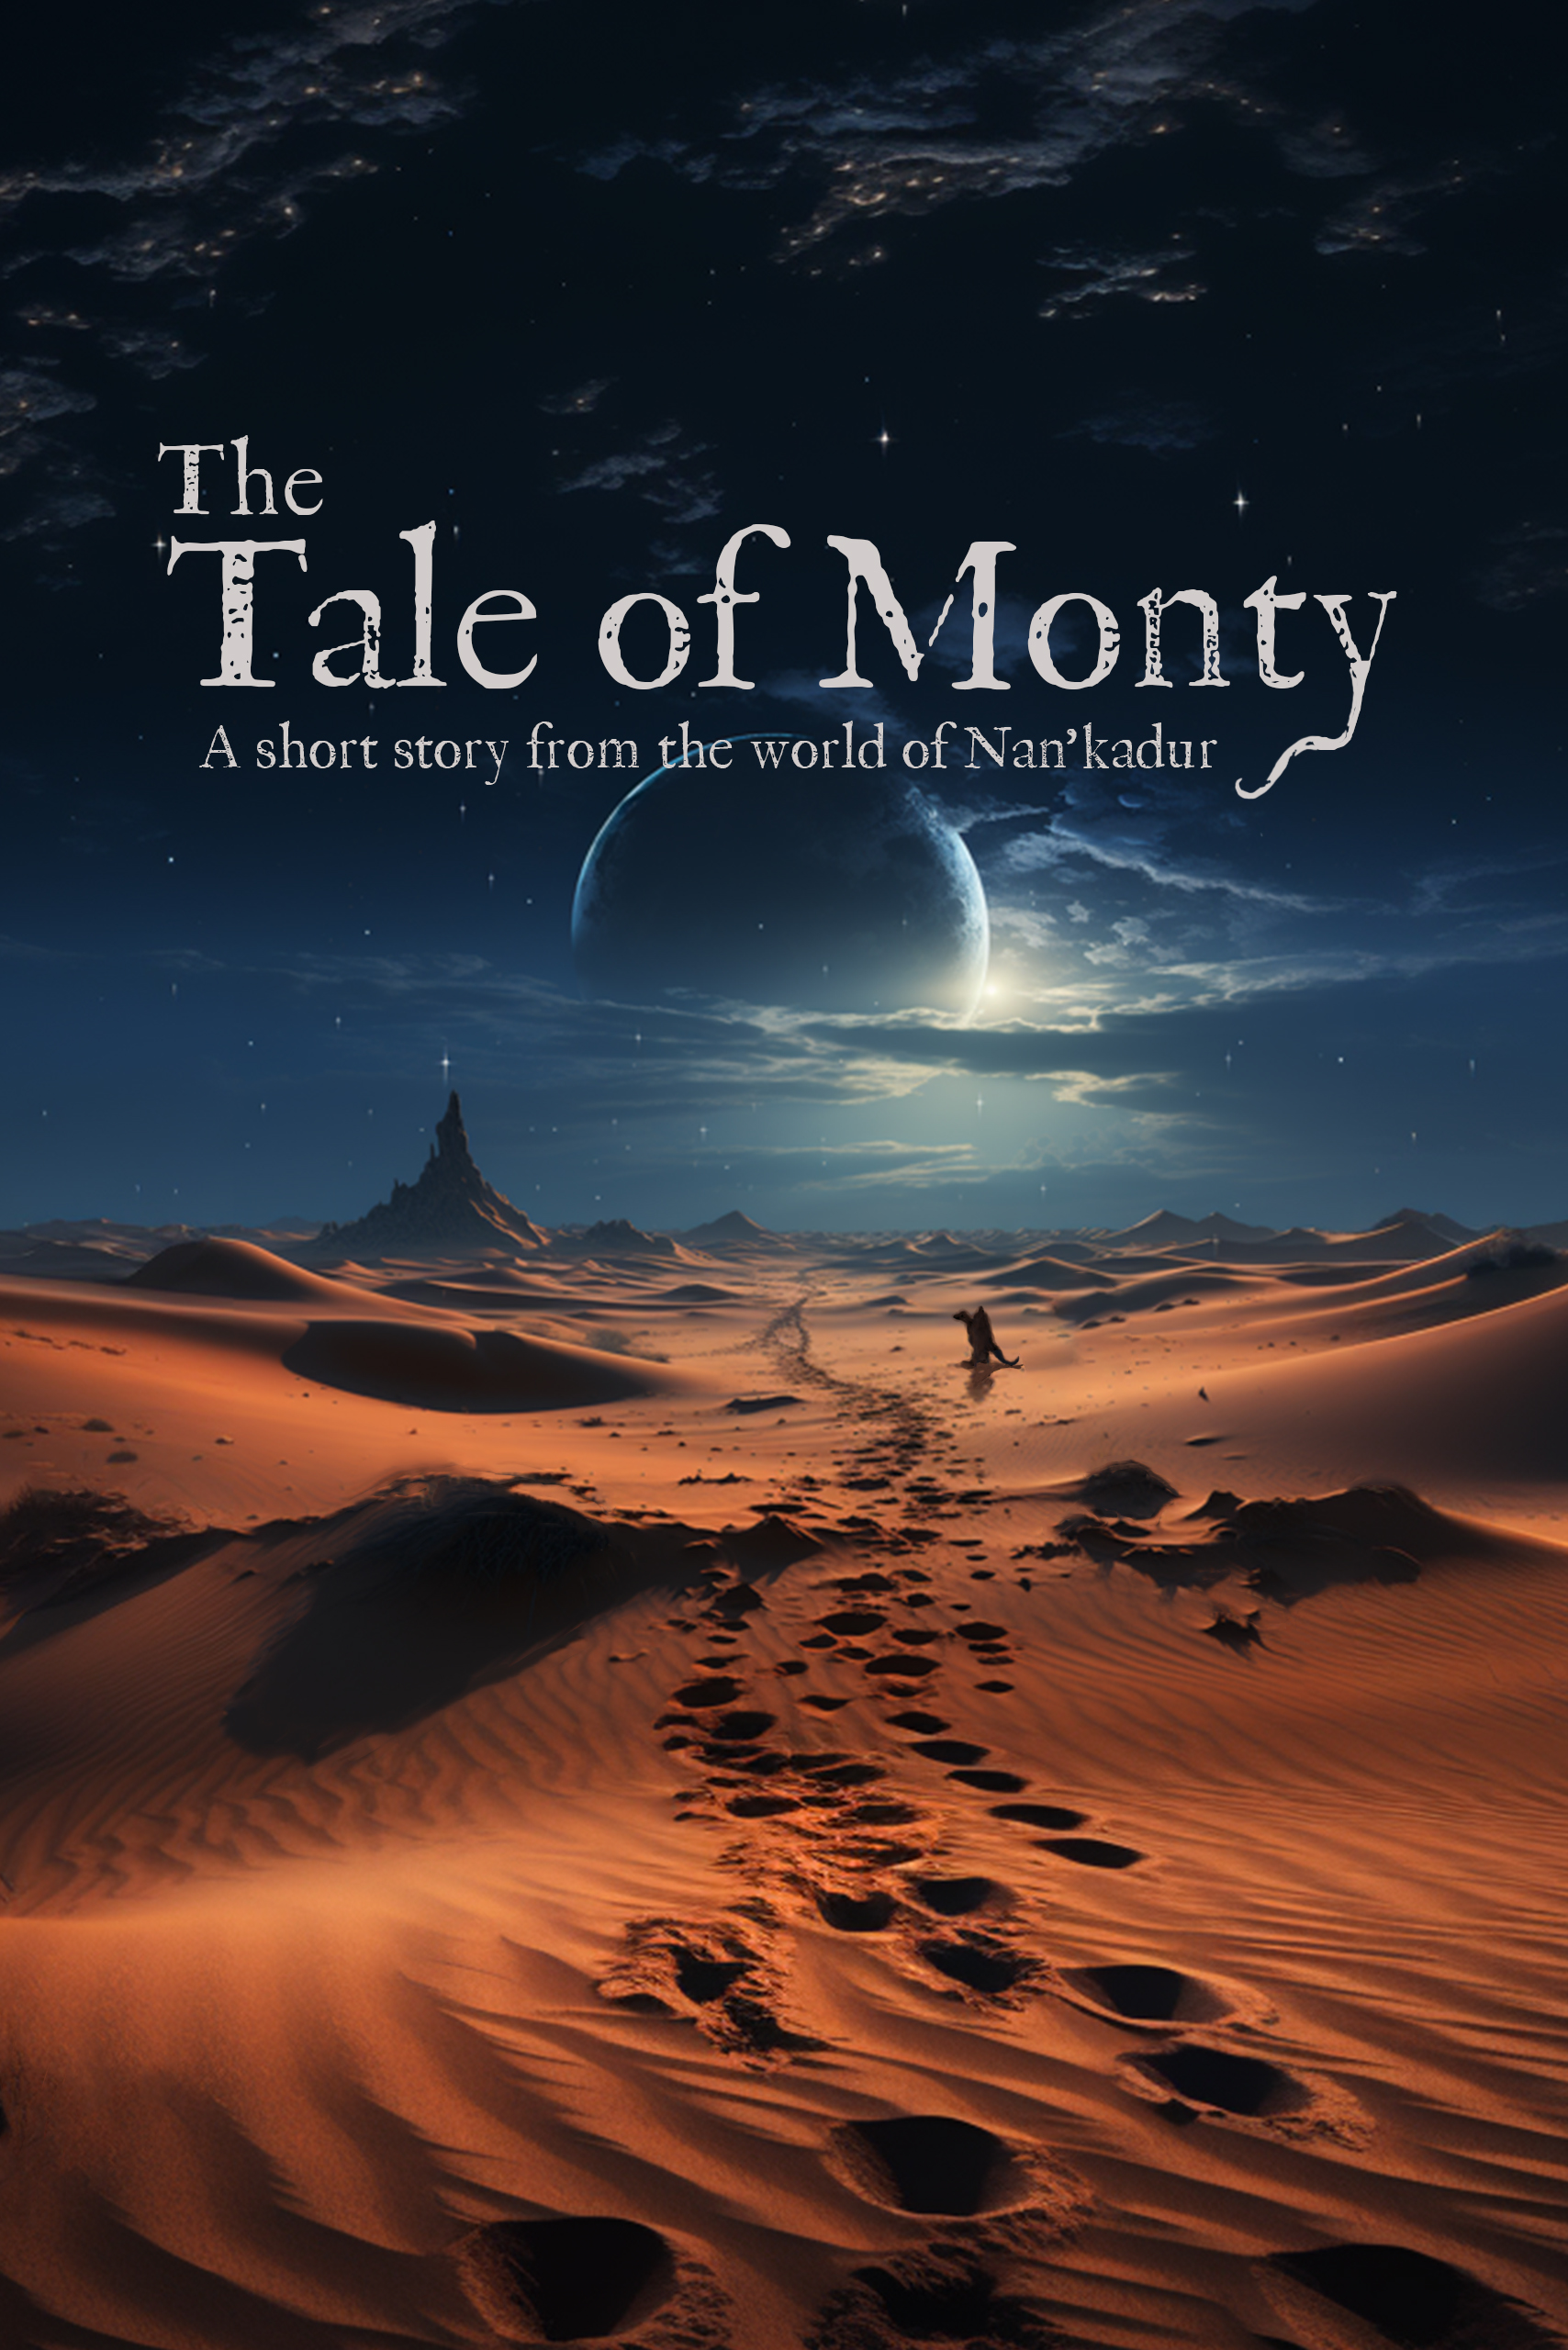 The Tale of Monty cover art